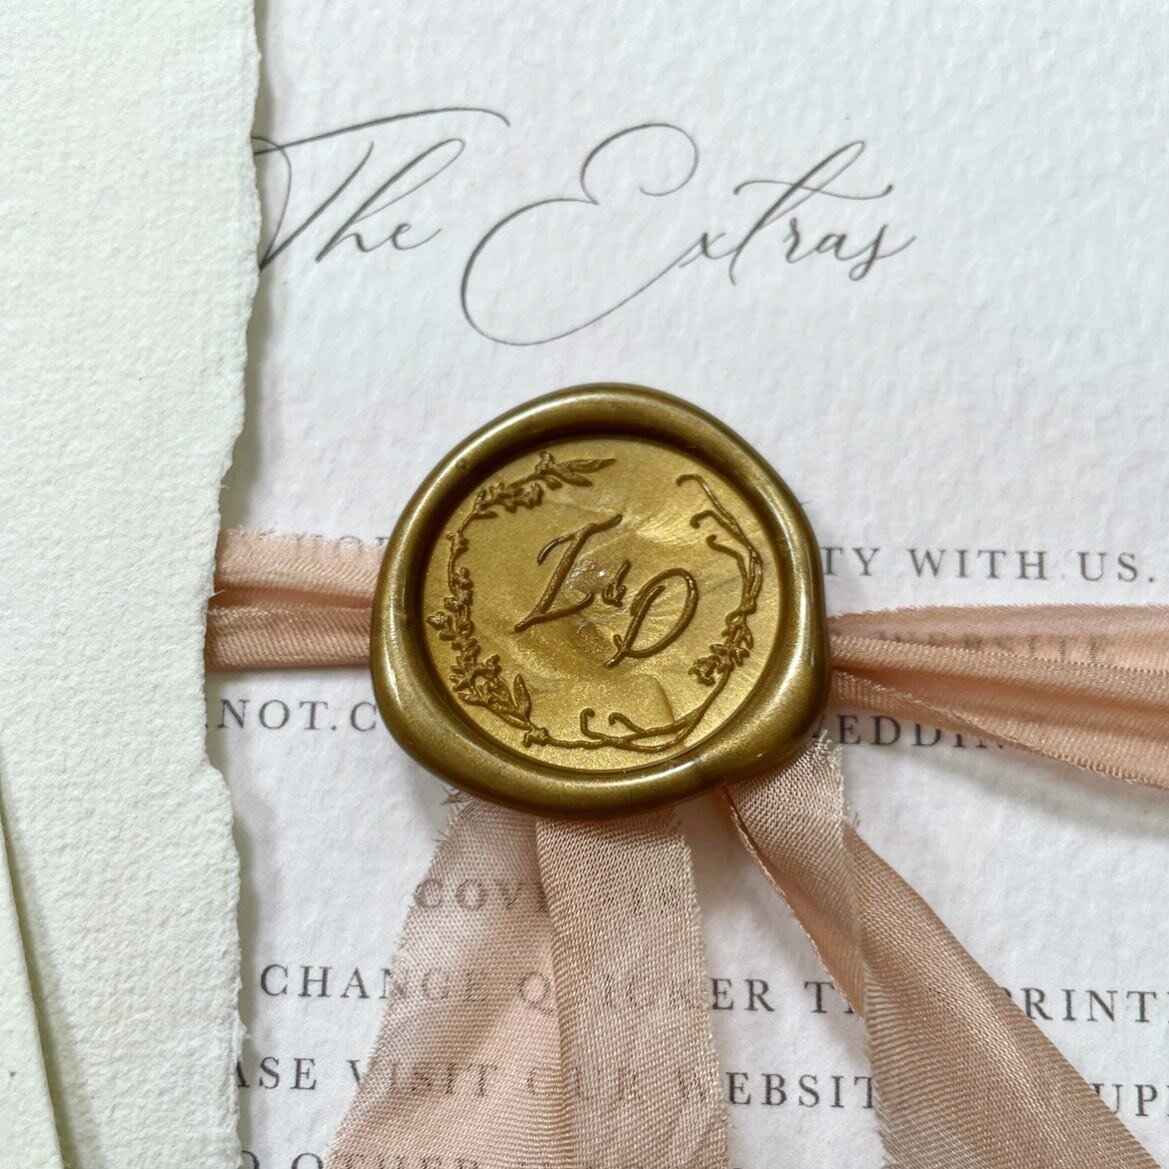 Who doesn&rsquo;t love an organic edge? We&rsquo;re here for all the details👌🏽
.
.
.
#livandluc #organicedge #wedding #weddinginvite #weddinginvitations #bride2023 #waxseal #ribbon #watercolourinvitations #handmadeinvitations